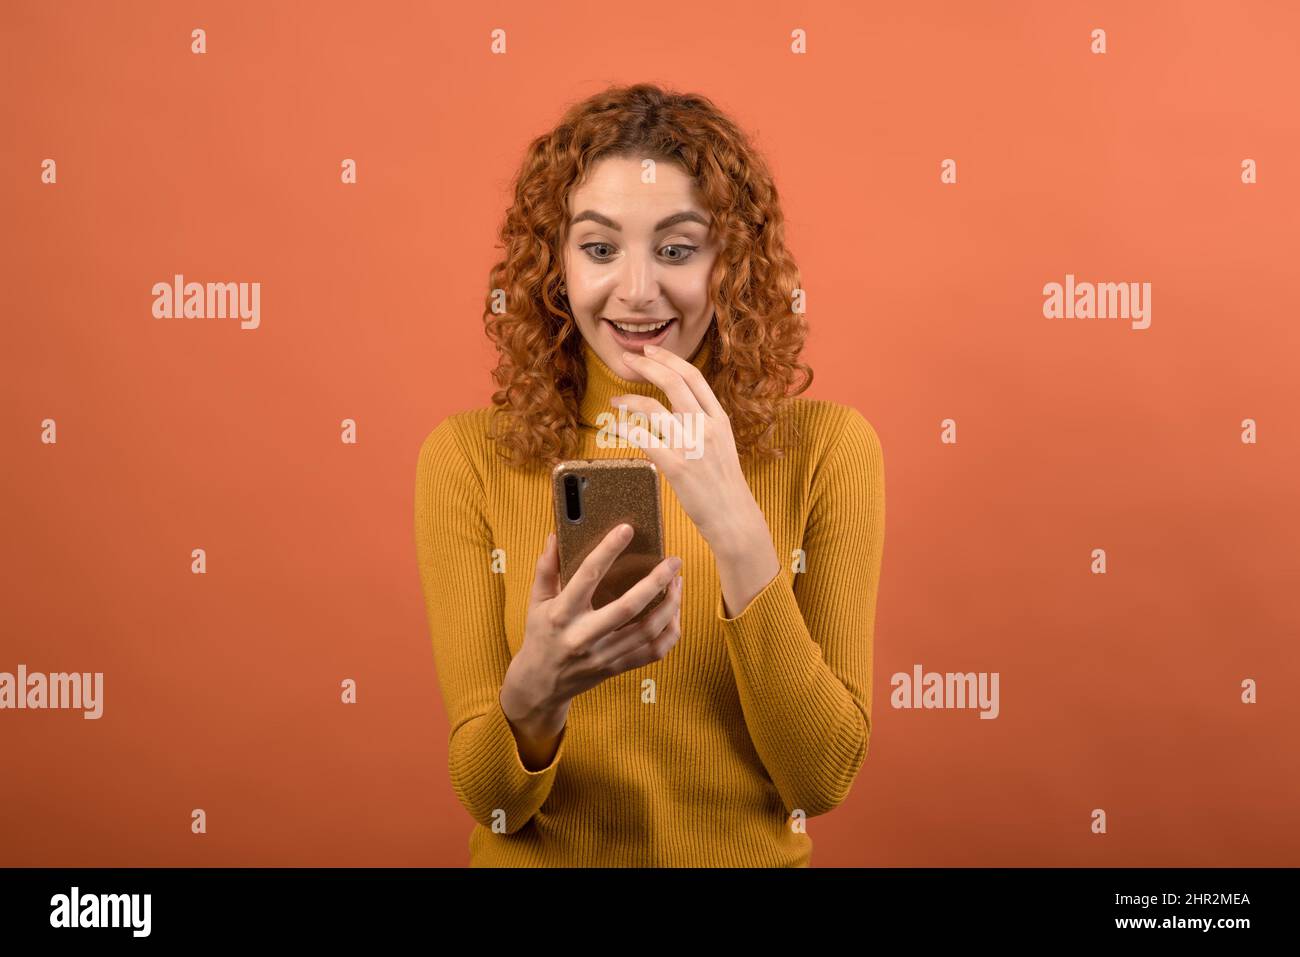 A young and attractive redhead Caucasian girl in an orange jumper using a smartphone and the girl is shocked isolated on an orange studio background. Stock Photo